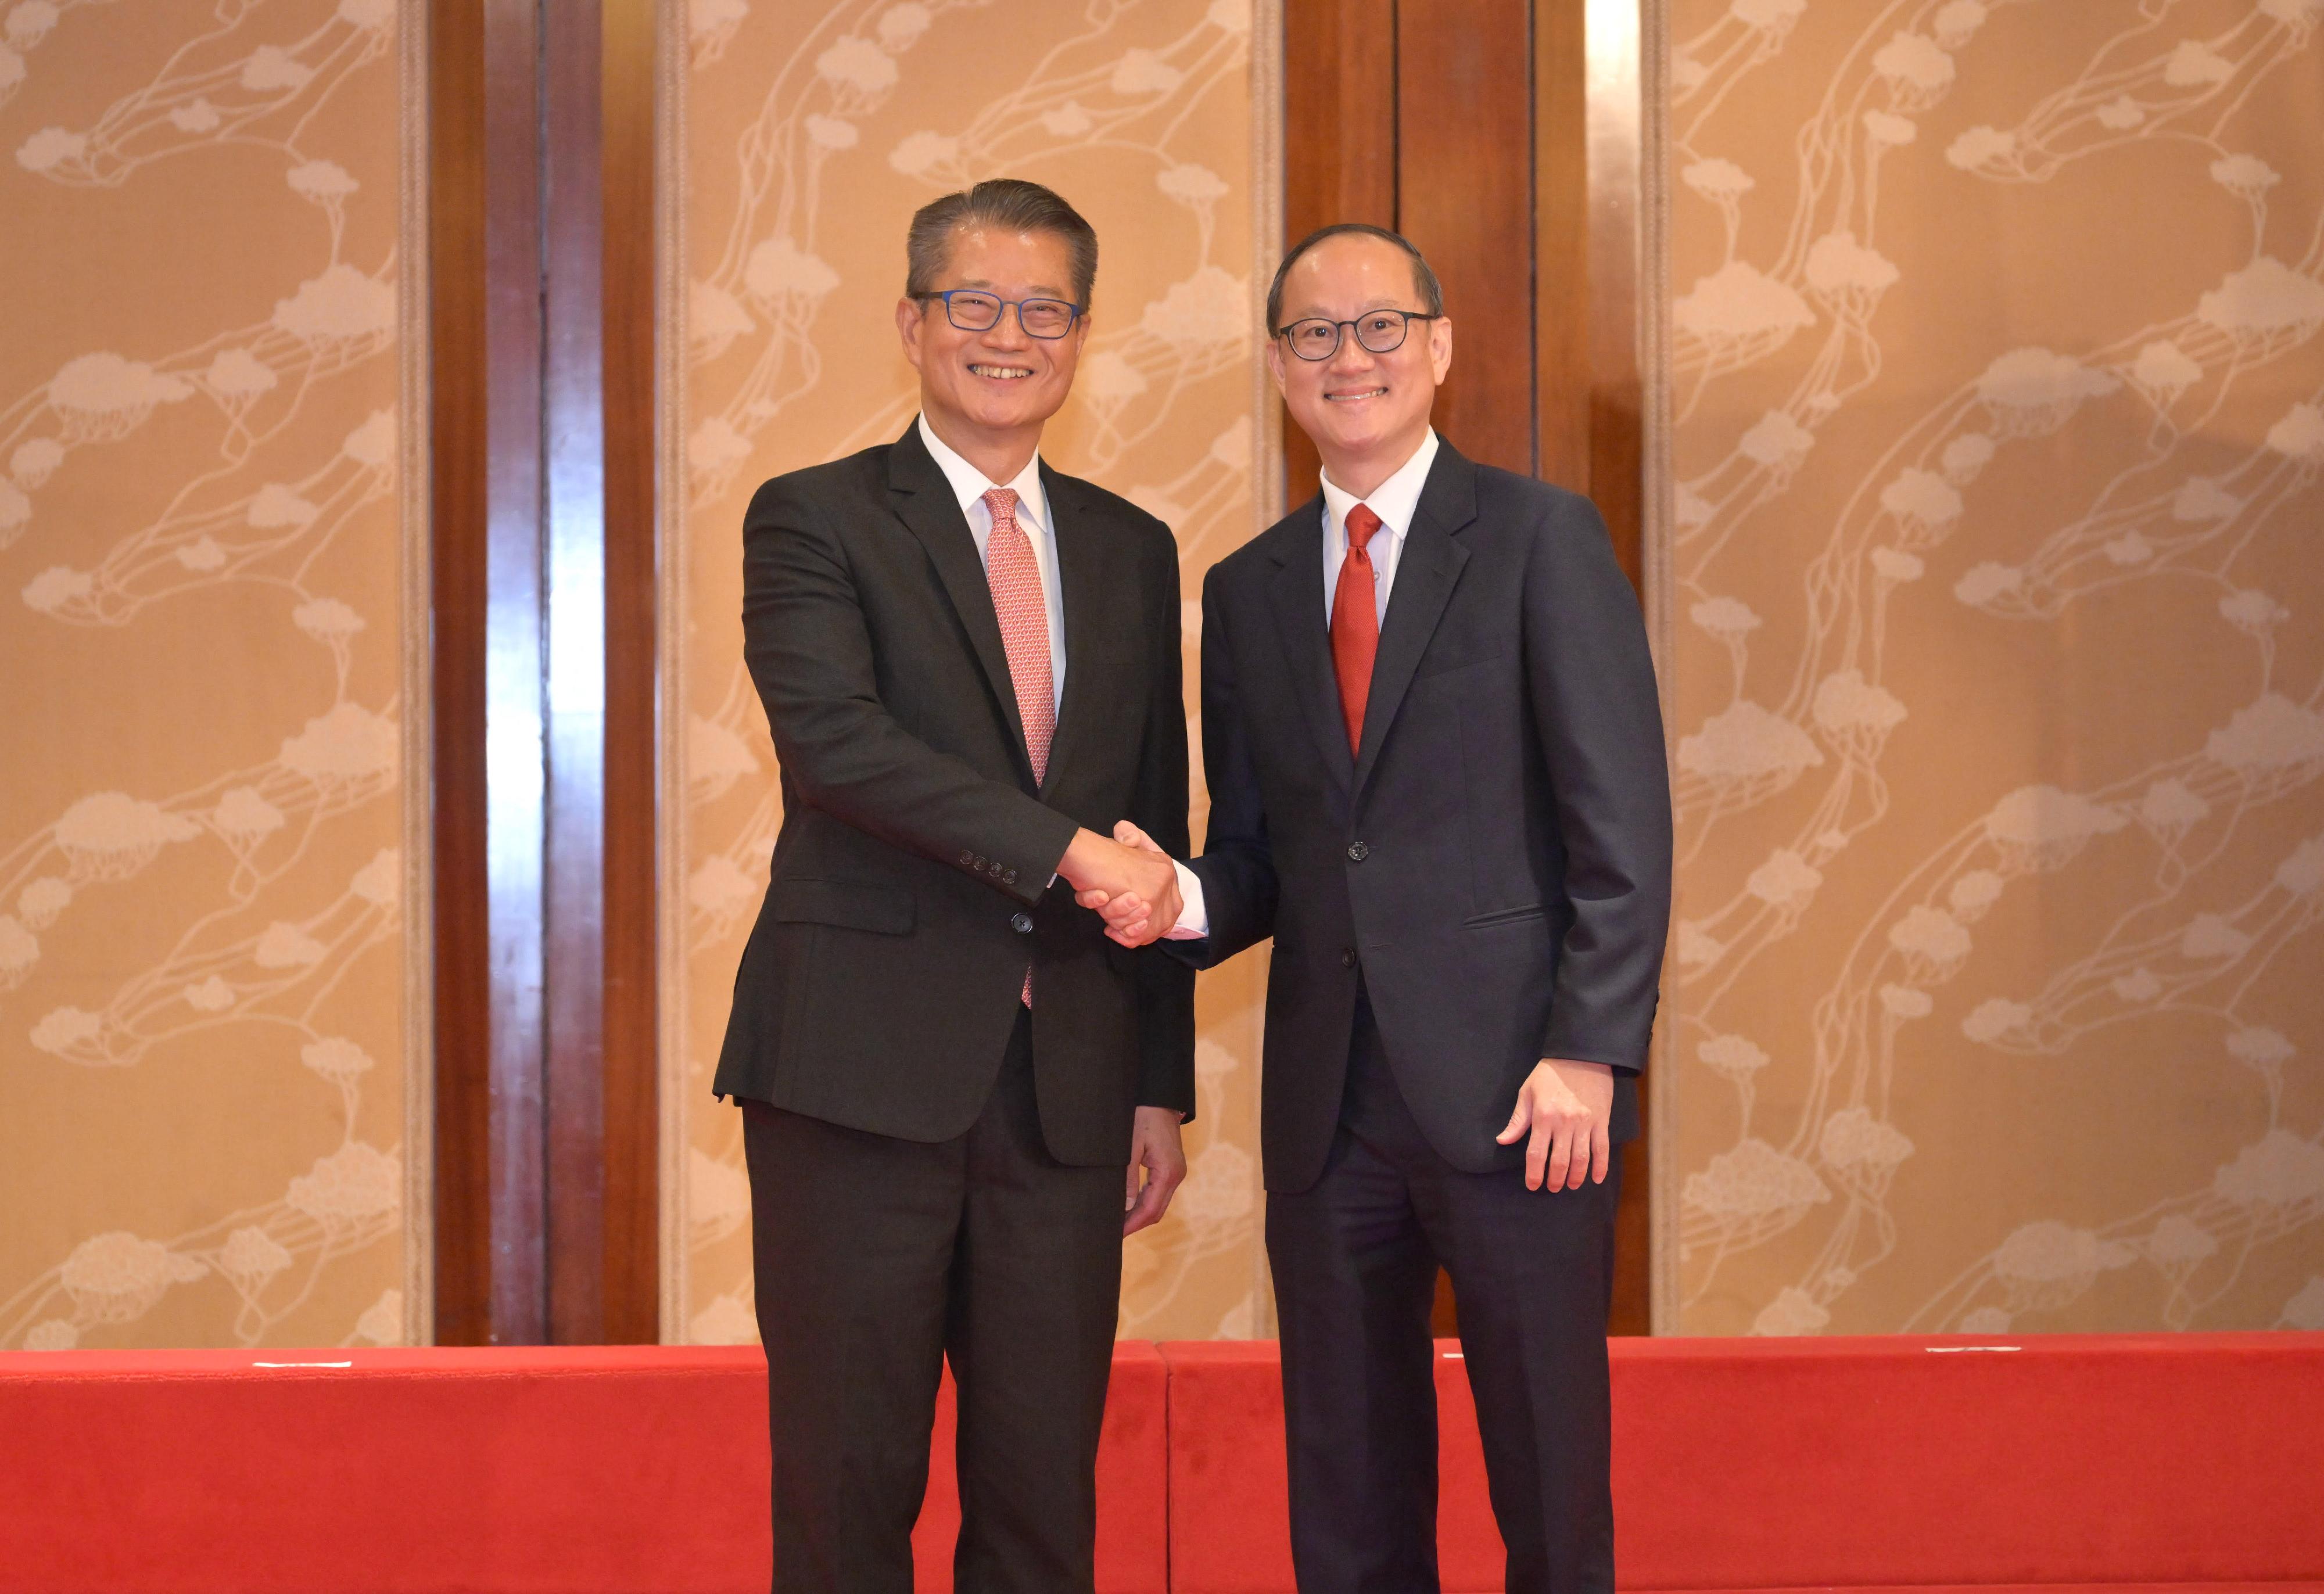 The Financial Secretary, Mr Paul Chan, today (August 4) attended the Lunch Reception in celebration of Singapore's 58th National Day. Photo shows Mr Chan (left) with the Consul-General of Singapore in Hong Kong, Mr Ong Siew Gay (right).